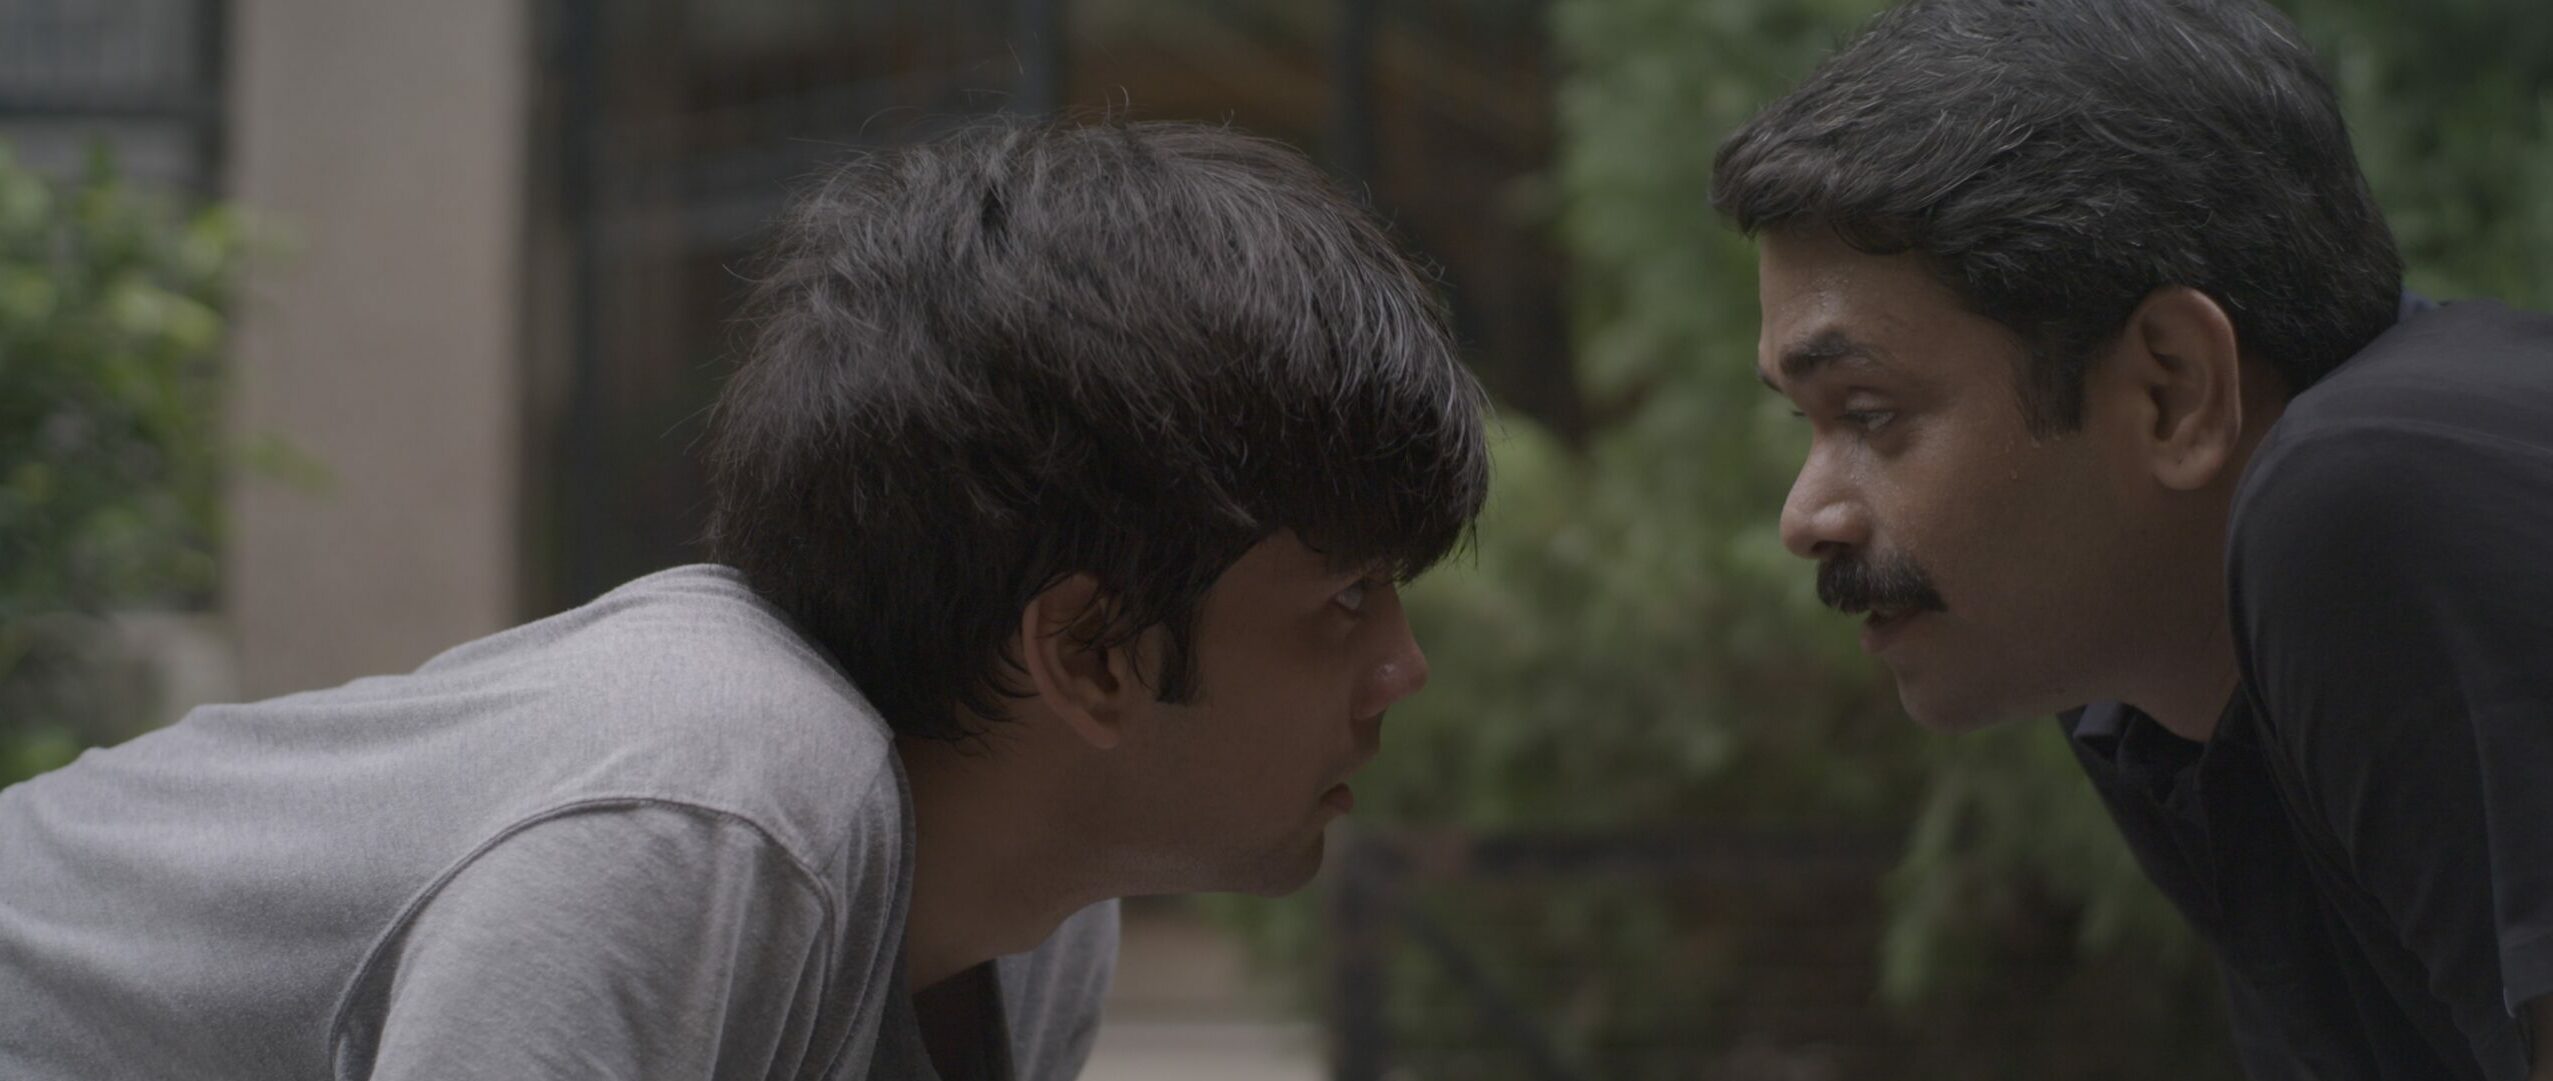 Still image from Arnav's Film Subah shows a father and son looking intensely at each other in front of green foliage.